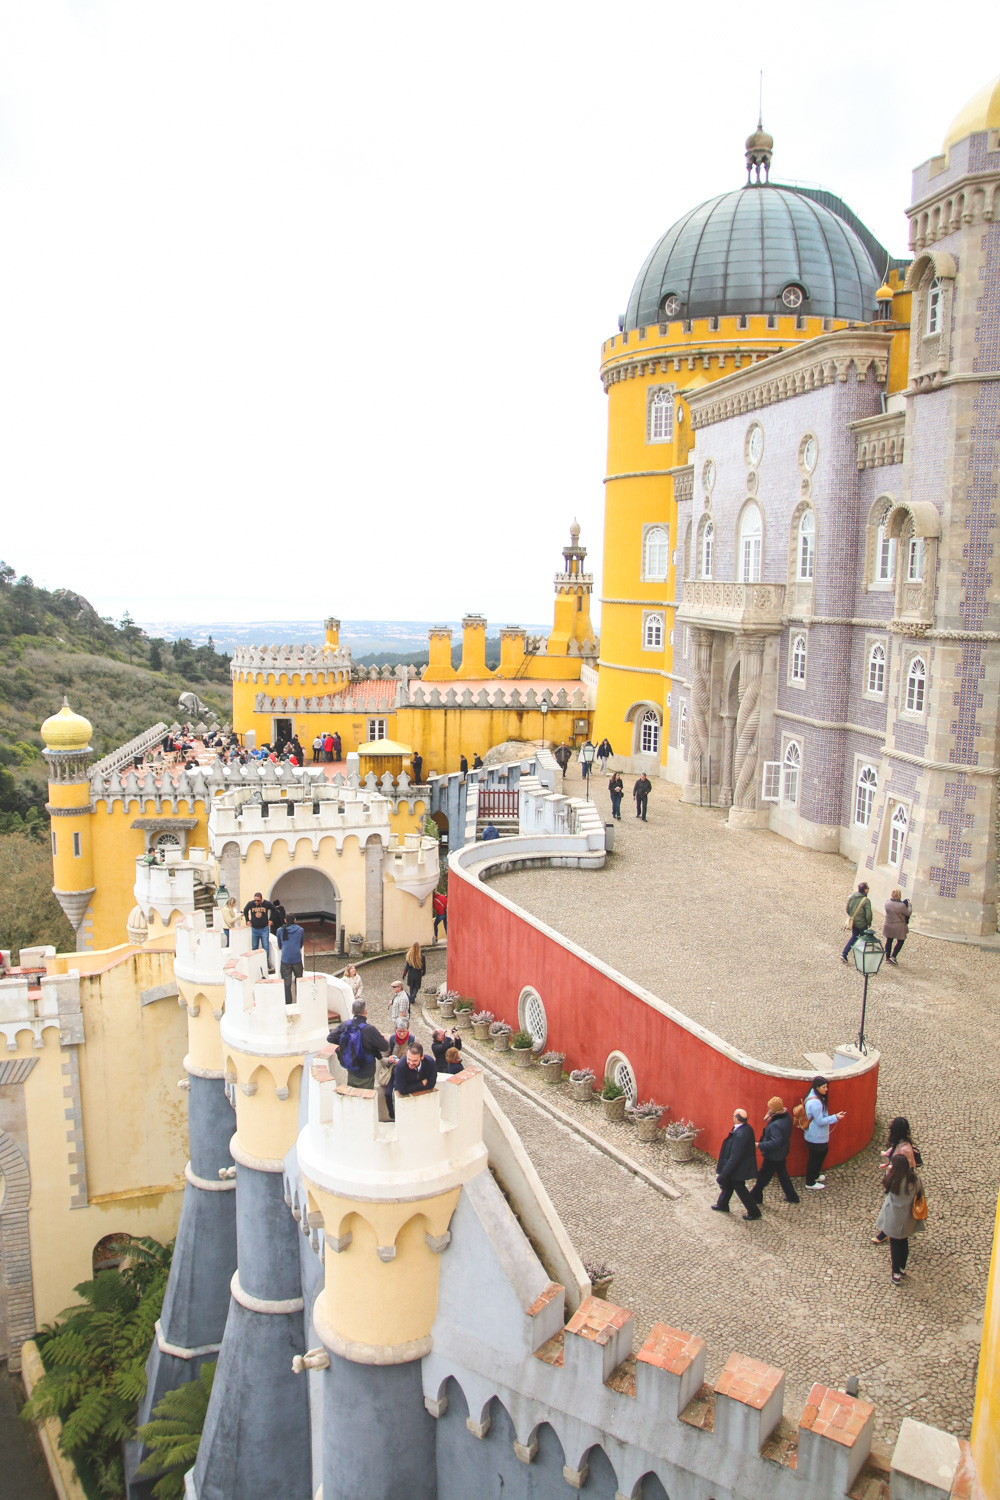 Visiting the Colourful Pena Palace in Sintra - April Everyday